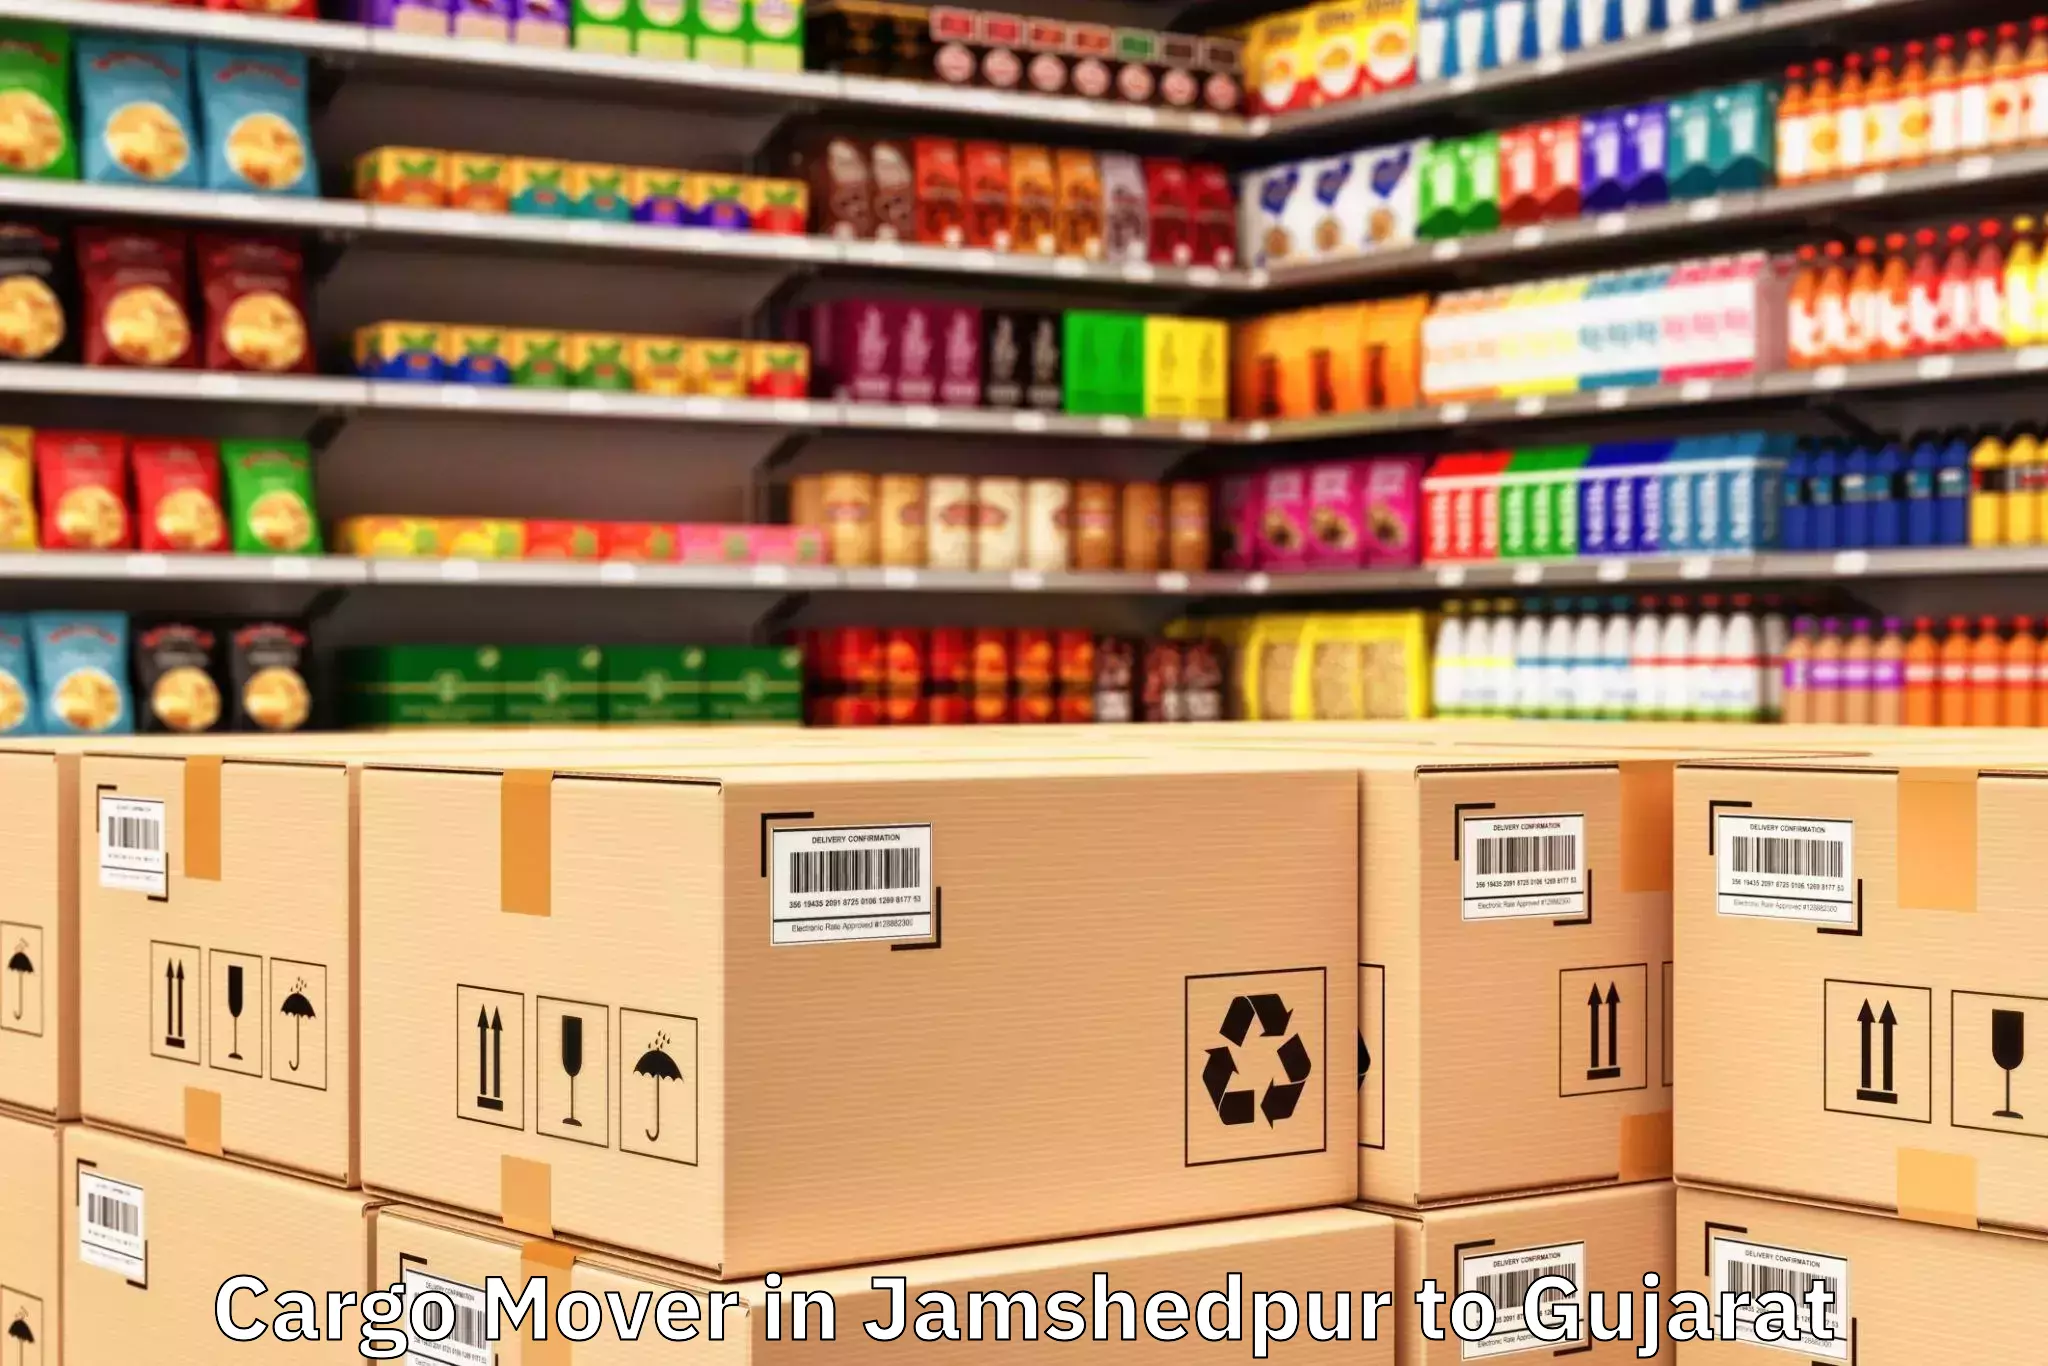 Jamshedpur to Deesa Cargo Mover Booking